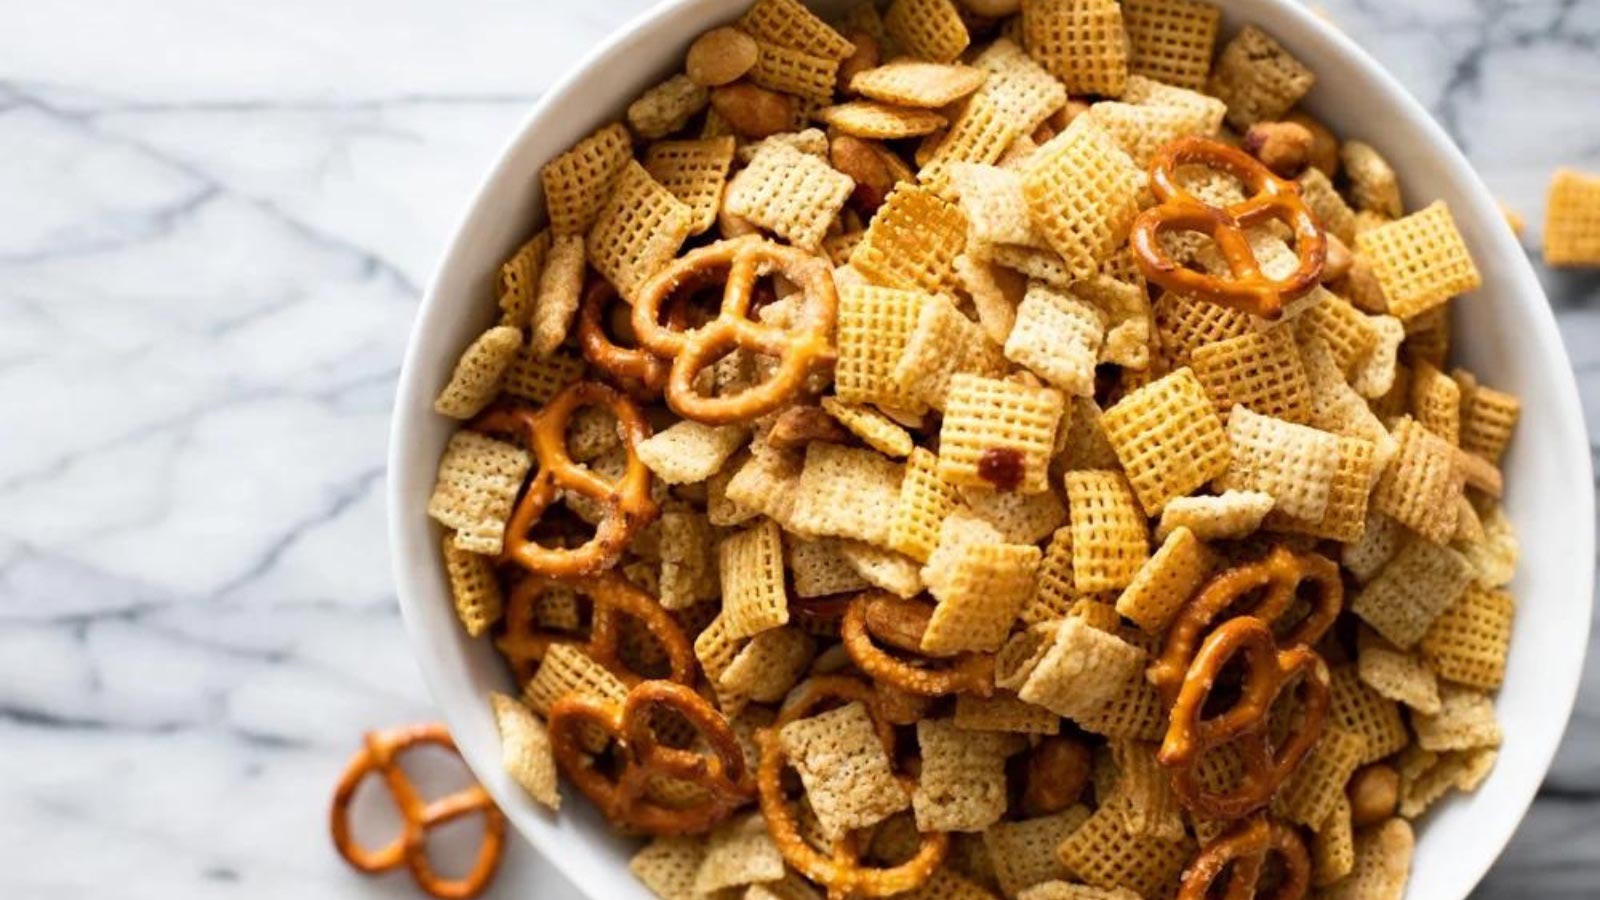 <p>This <a href="https://myeverydaytable.com/irresistible-sweet-and-salty-chex-mix-recipe/" rel="external noopener noreferrer" title=" External link. Opens in a new tab.">irresistible sweet and salty Chex mix</a> hits all of the flavors that you are looking for when you want a tasty snack. It’s SO easy to make, be warned, it IS irresistible. You only need 8 simple ingredients, and you can customize it any way you want to suit your tastes. </p>